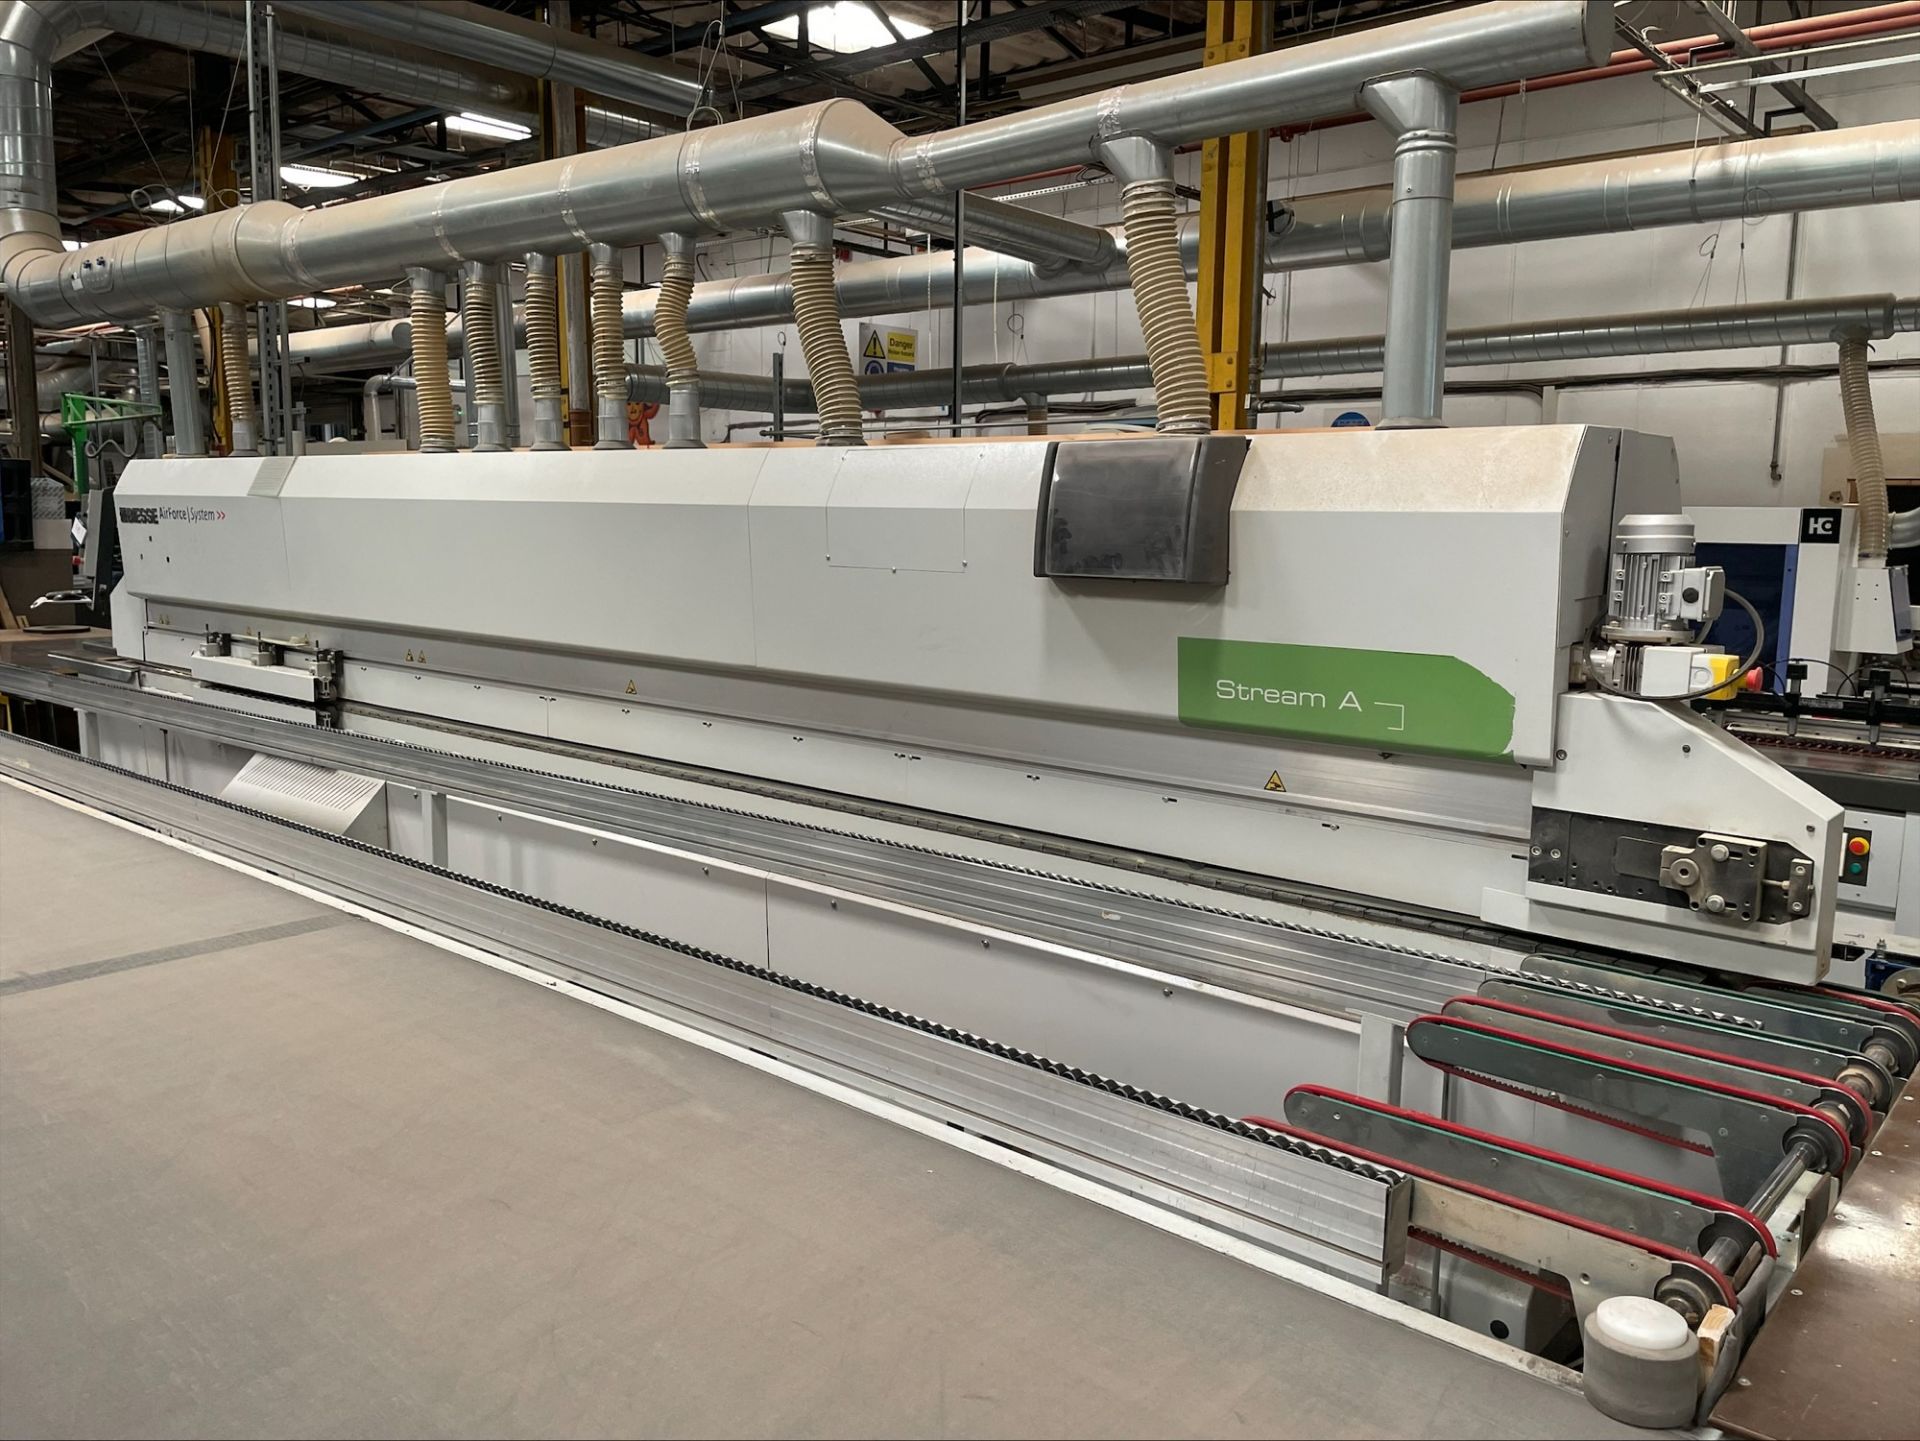 Biesse Stream A / 6.0 automatic single sided edgebander, Serial No. 1000014053 (2016), machine - Image 2 of 12